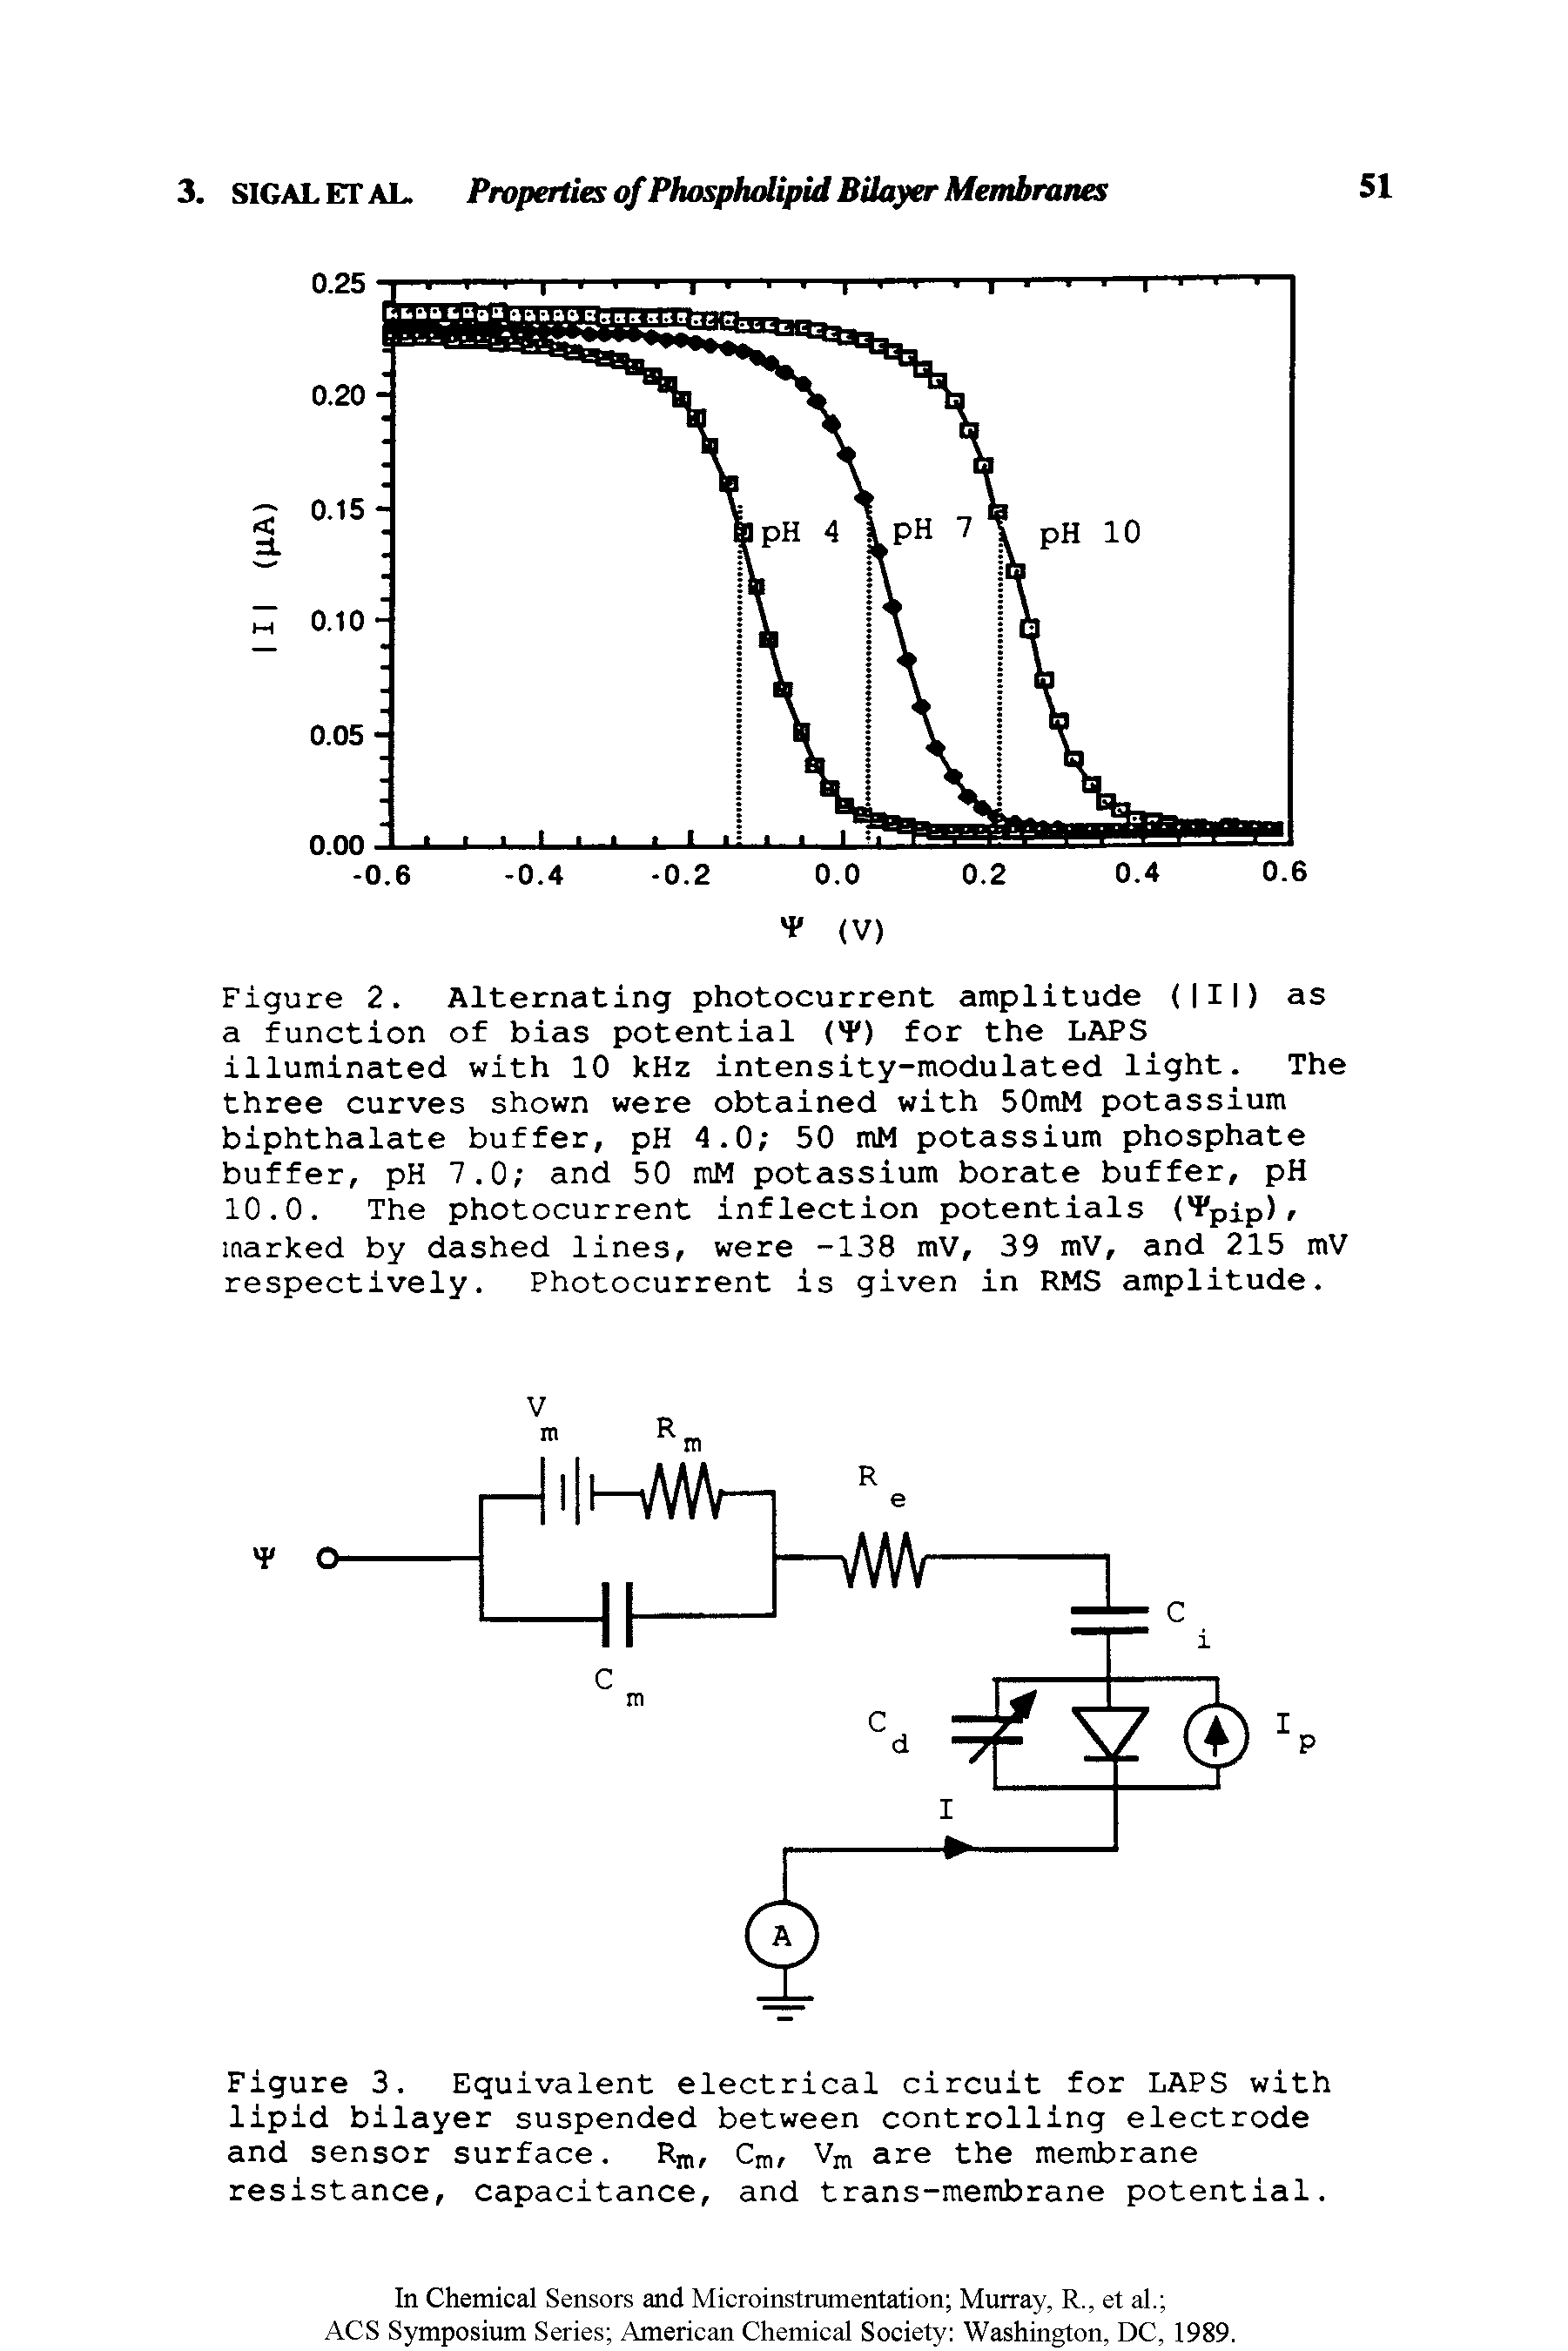 Figure 2. Alternating photocurrent amplitude (111) as a function of bias potential (4 ) for the LAPS illuminated with 10 kHz intensity-modulated light. The three curves shown were obtained with 50mM potassium biphthalate buffer, pH 4.0 50 mM potassium phosphate buffer, pH 7.0 and 50 mM potassium borate buffer, pH 10.0. The photocurrent inflection potentials (4 pip), marked by dashed lines, were -138 mV, 39 mV, and 215 mV respectively. Photocurrent is given in RMS amplitude.